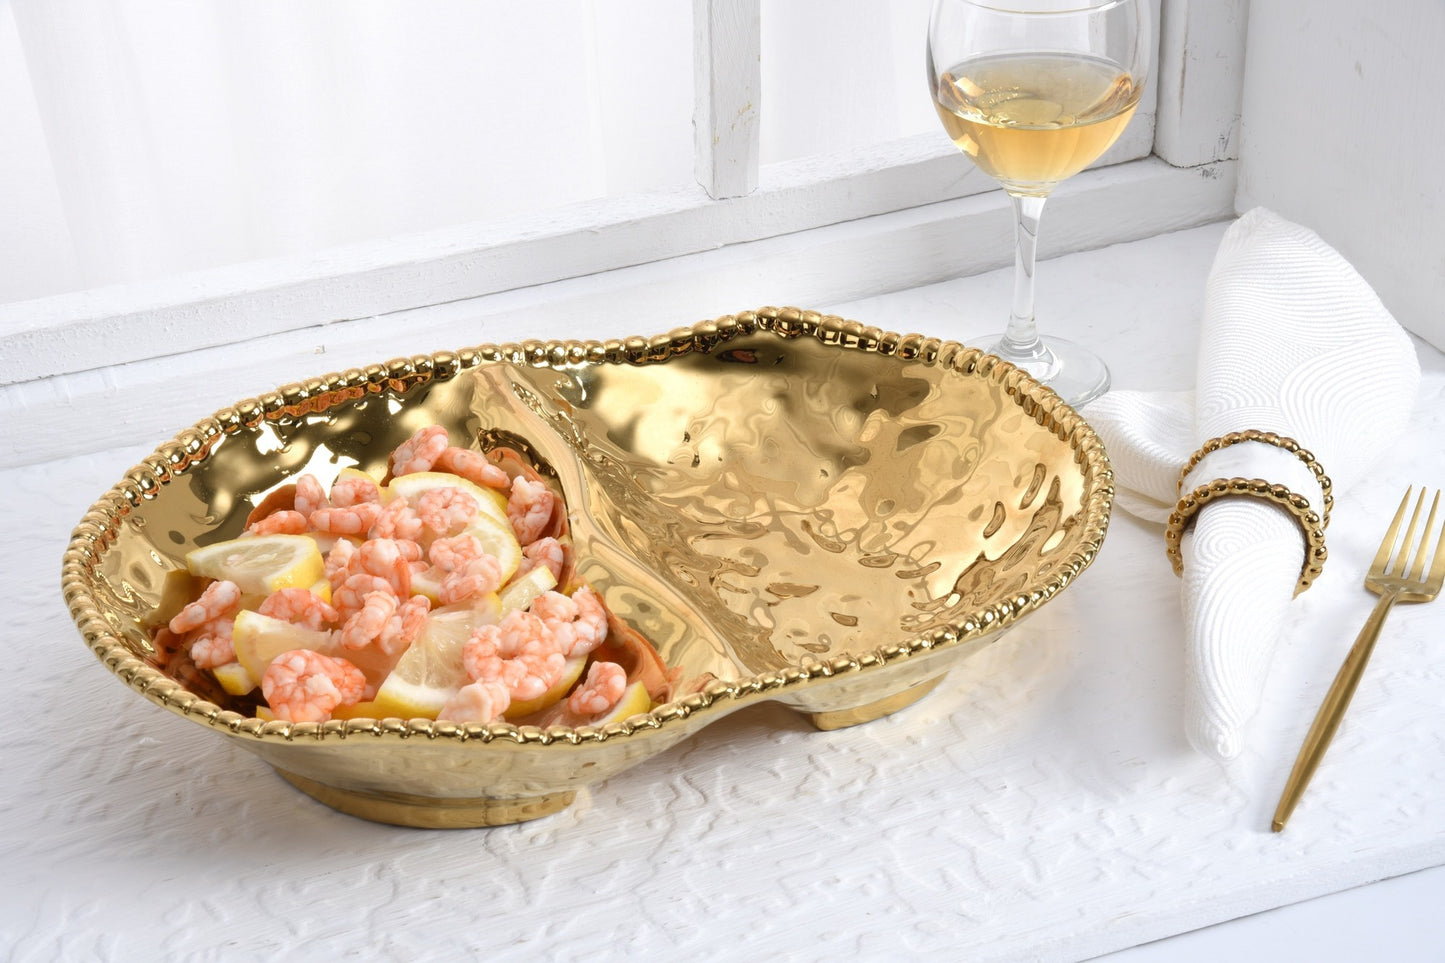 PAMPA BAY TWO-SECTION SERVING BOWL IN MONACO